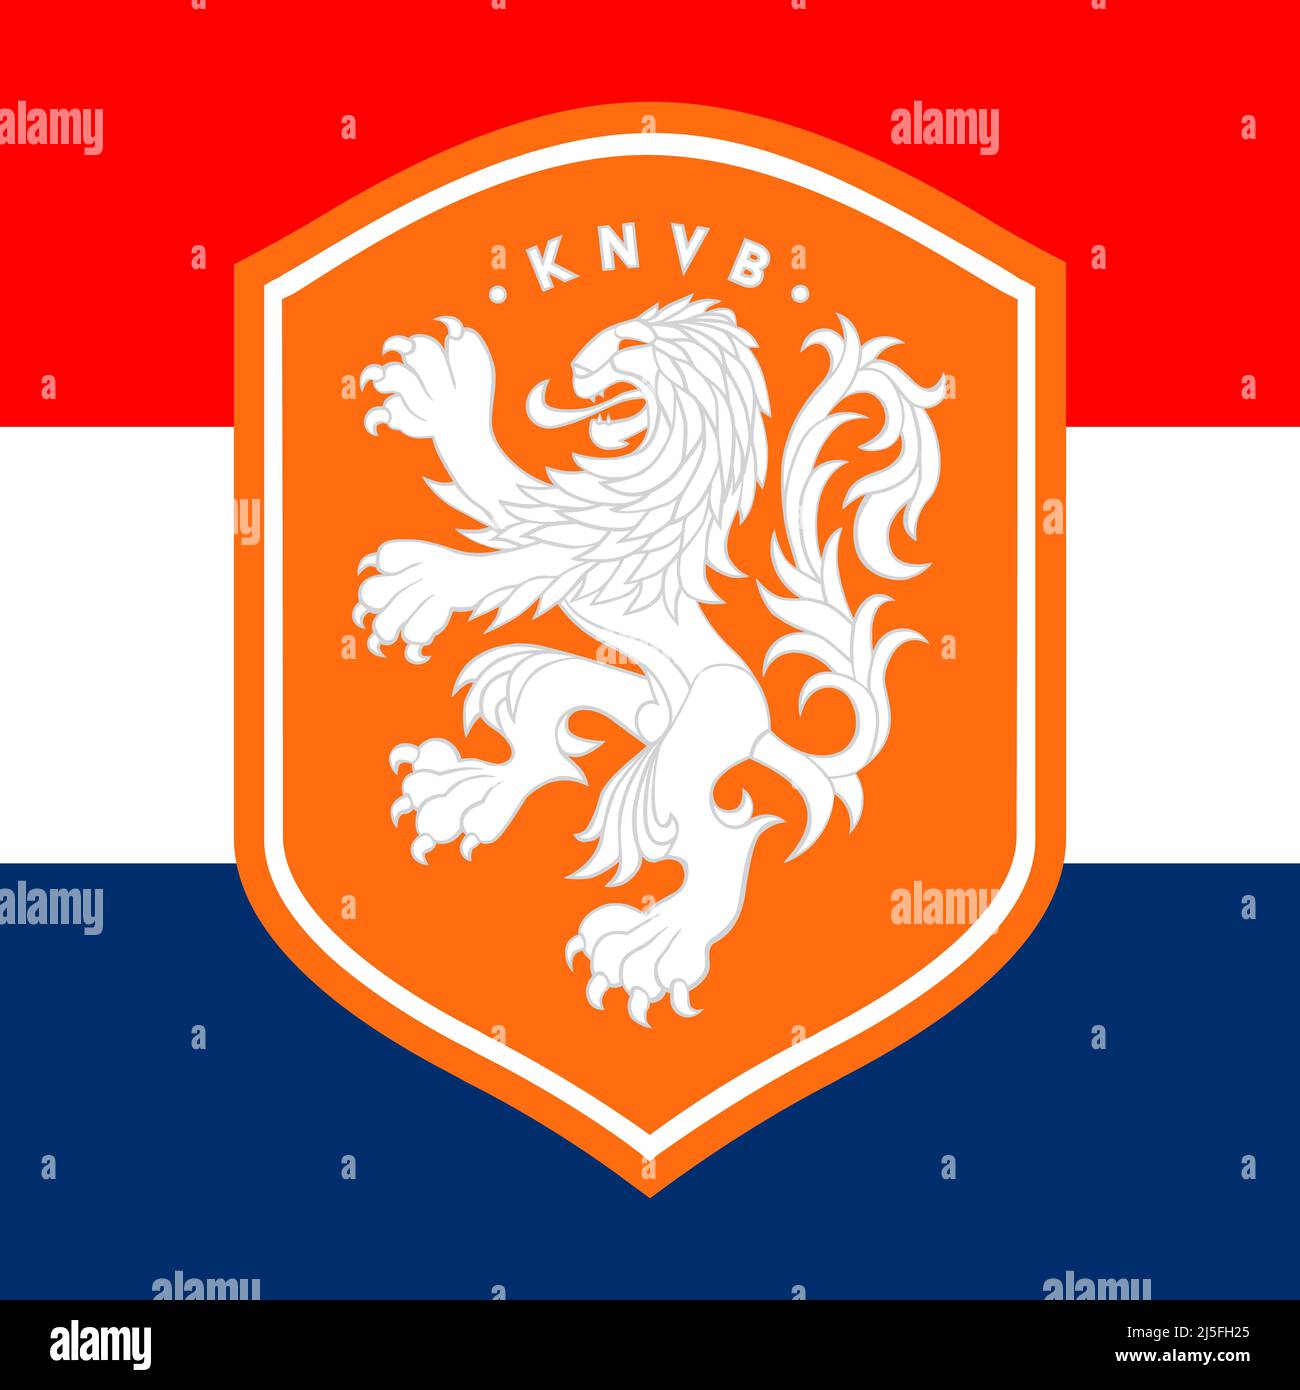 Knvb logo hi-res stock photography and images - Alamy